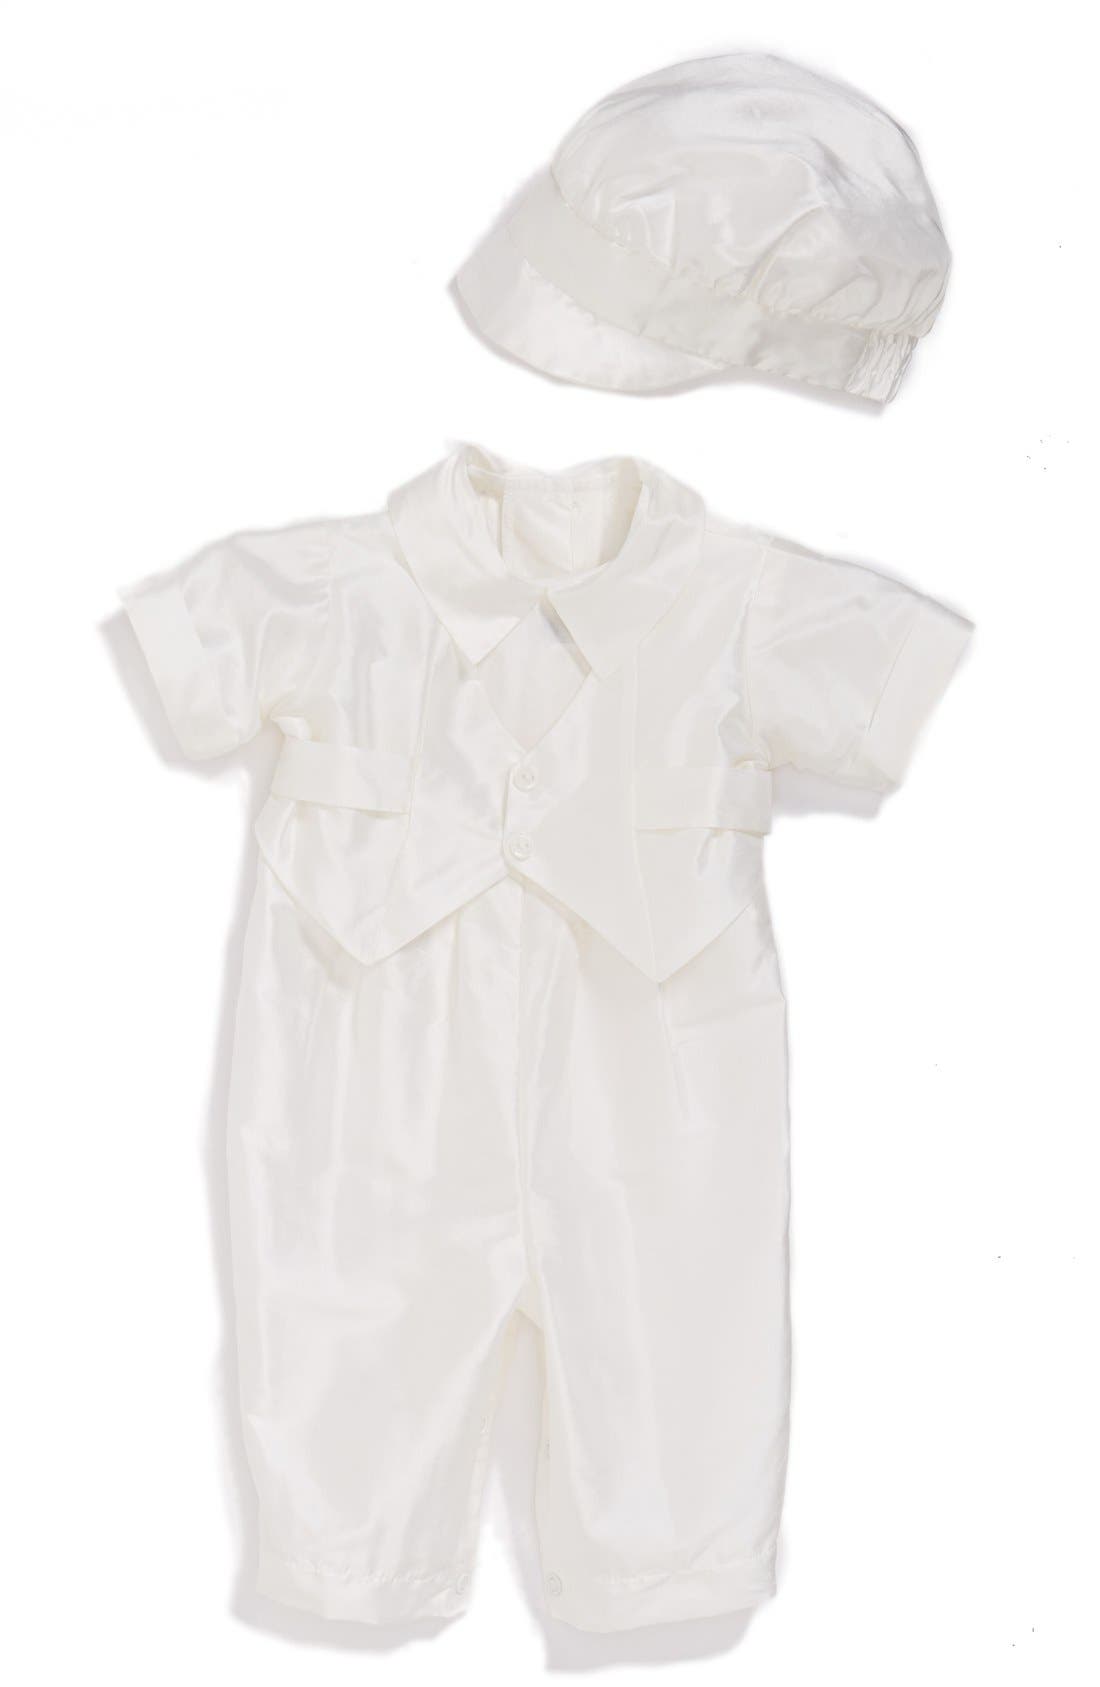 nordstrom christening outfit boy